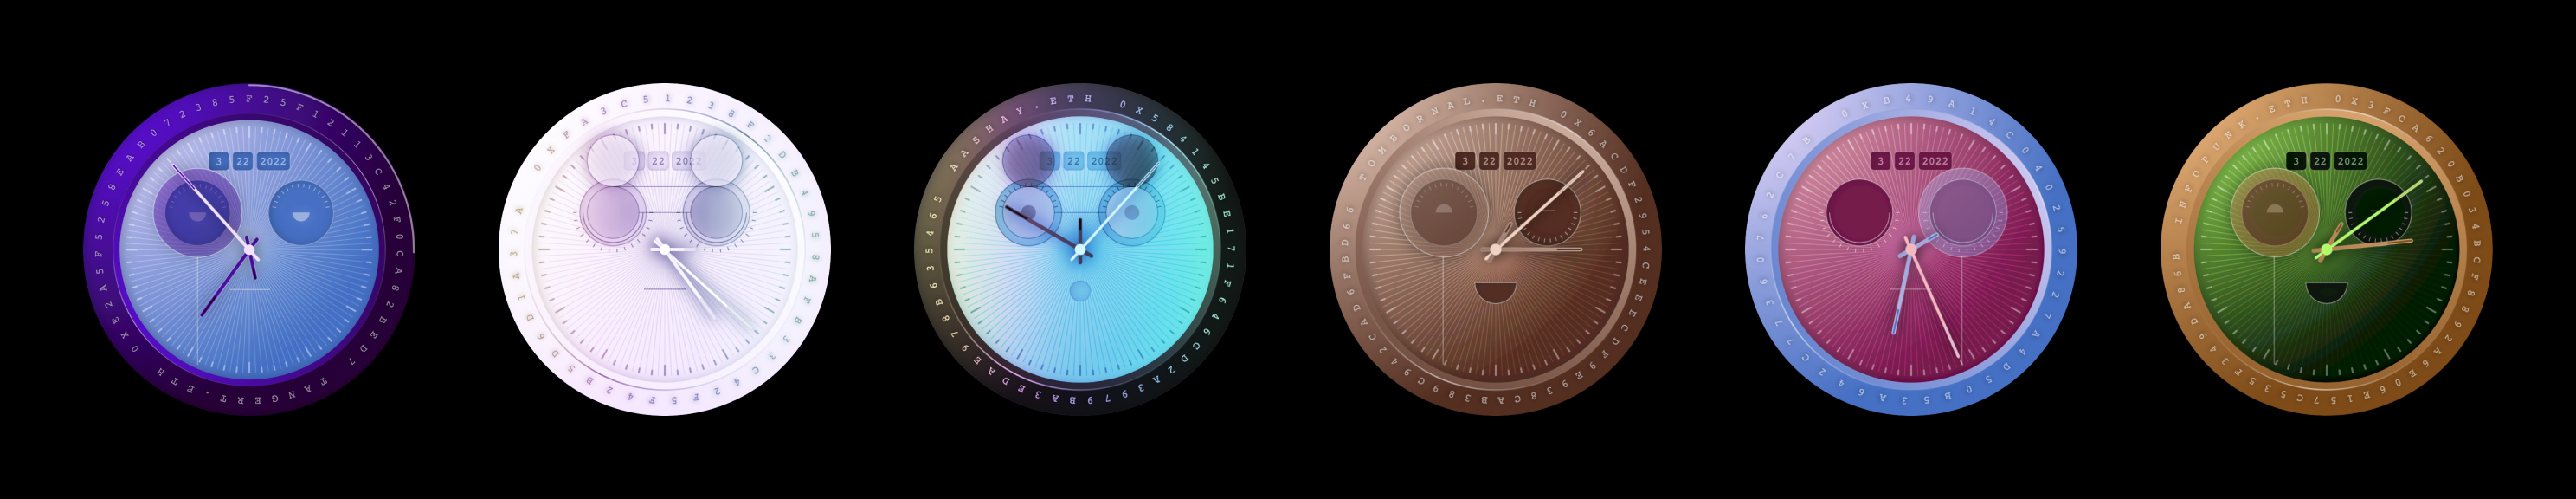 6 Watchfaces in a row